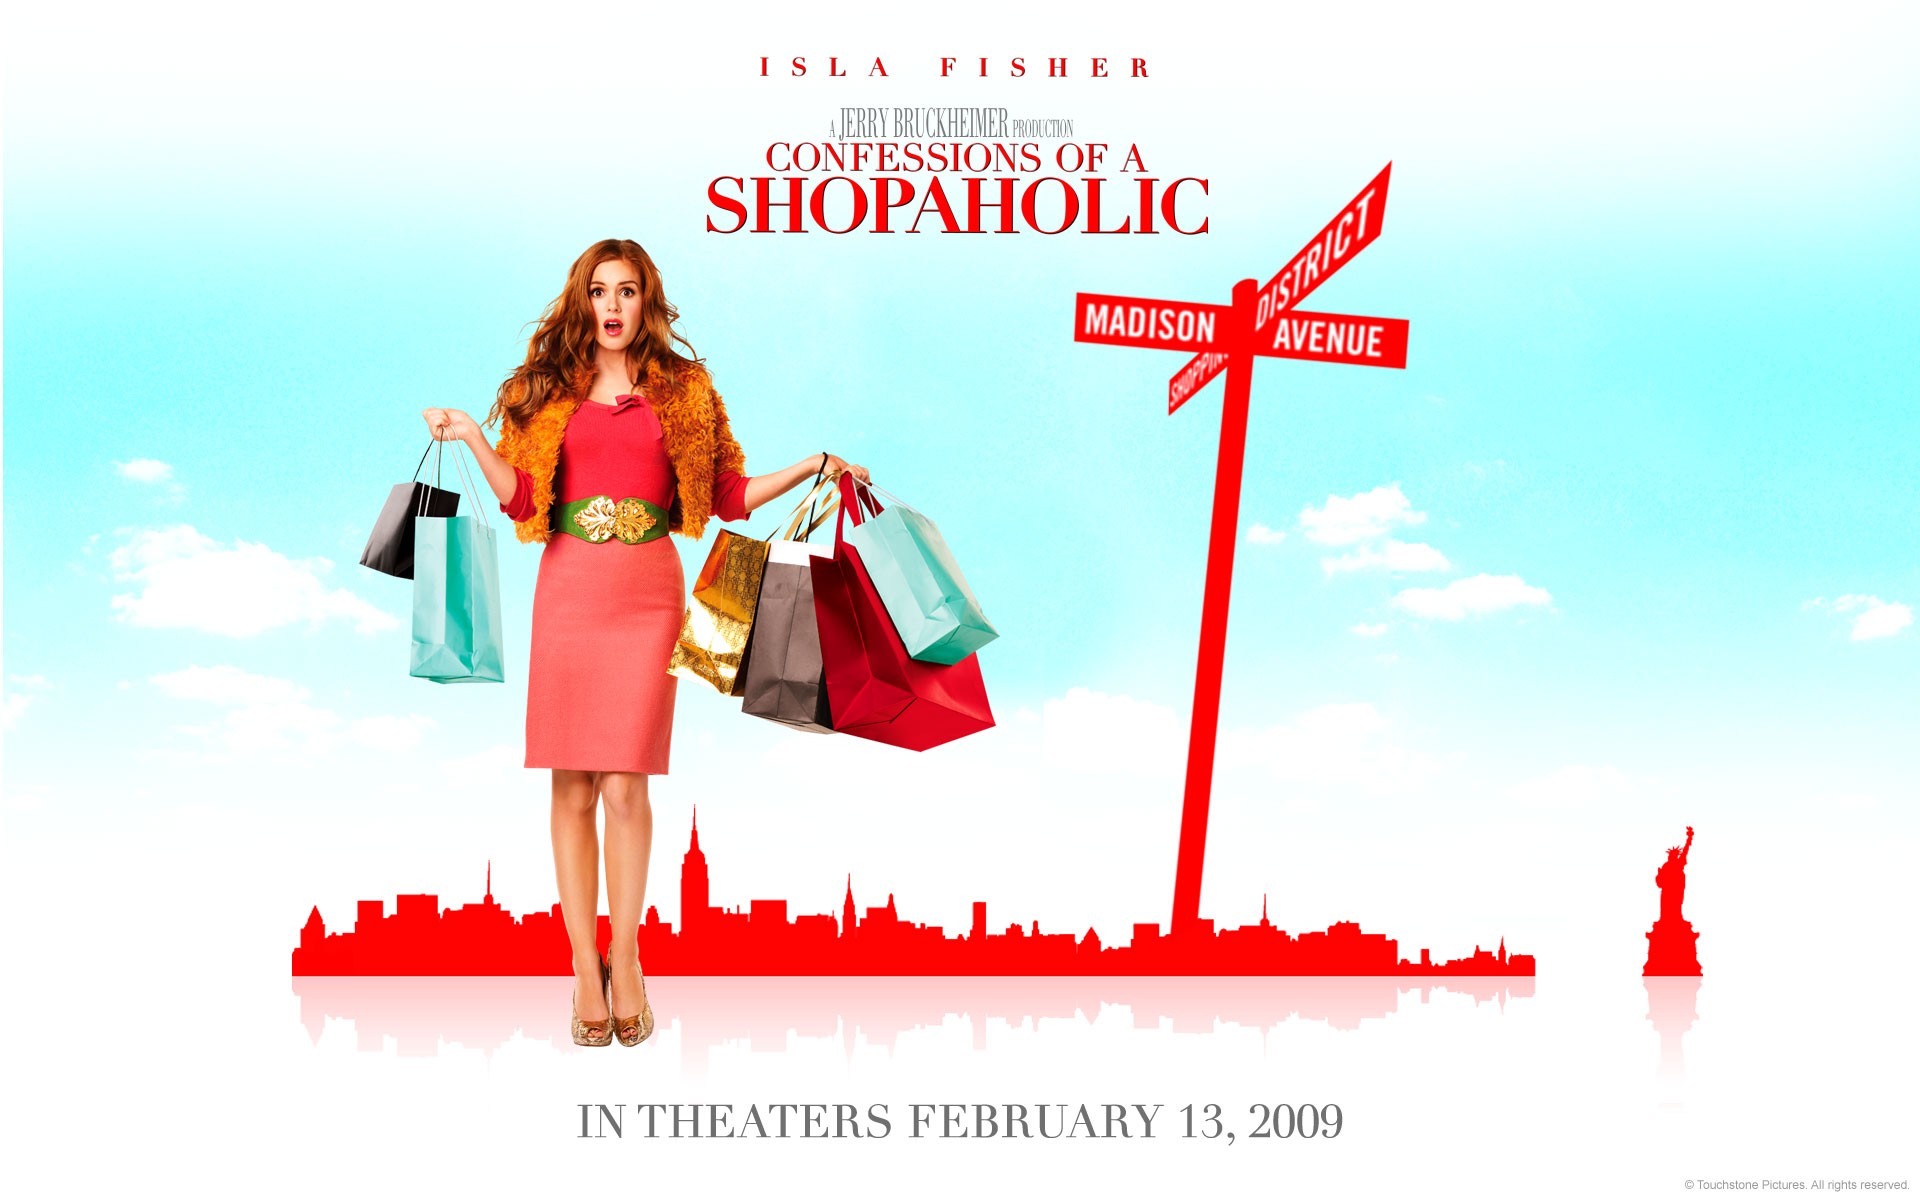 http://images.movieplayer.it/2009/01/23/un-wallpaper-del-film-i-love-shopping-con-isla-fisher-103112.jpg